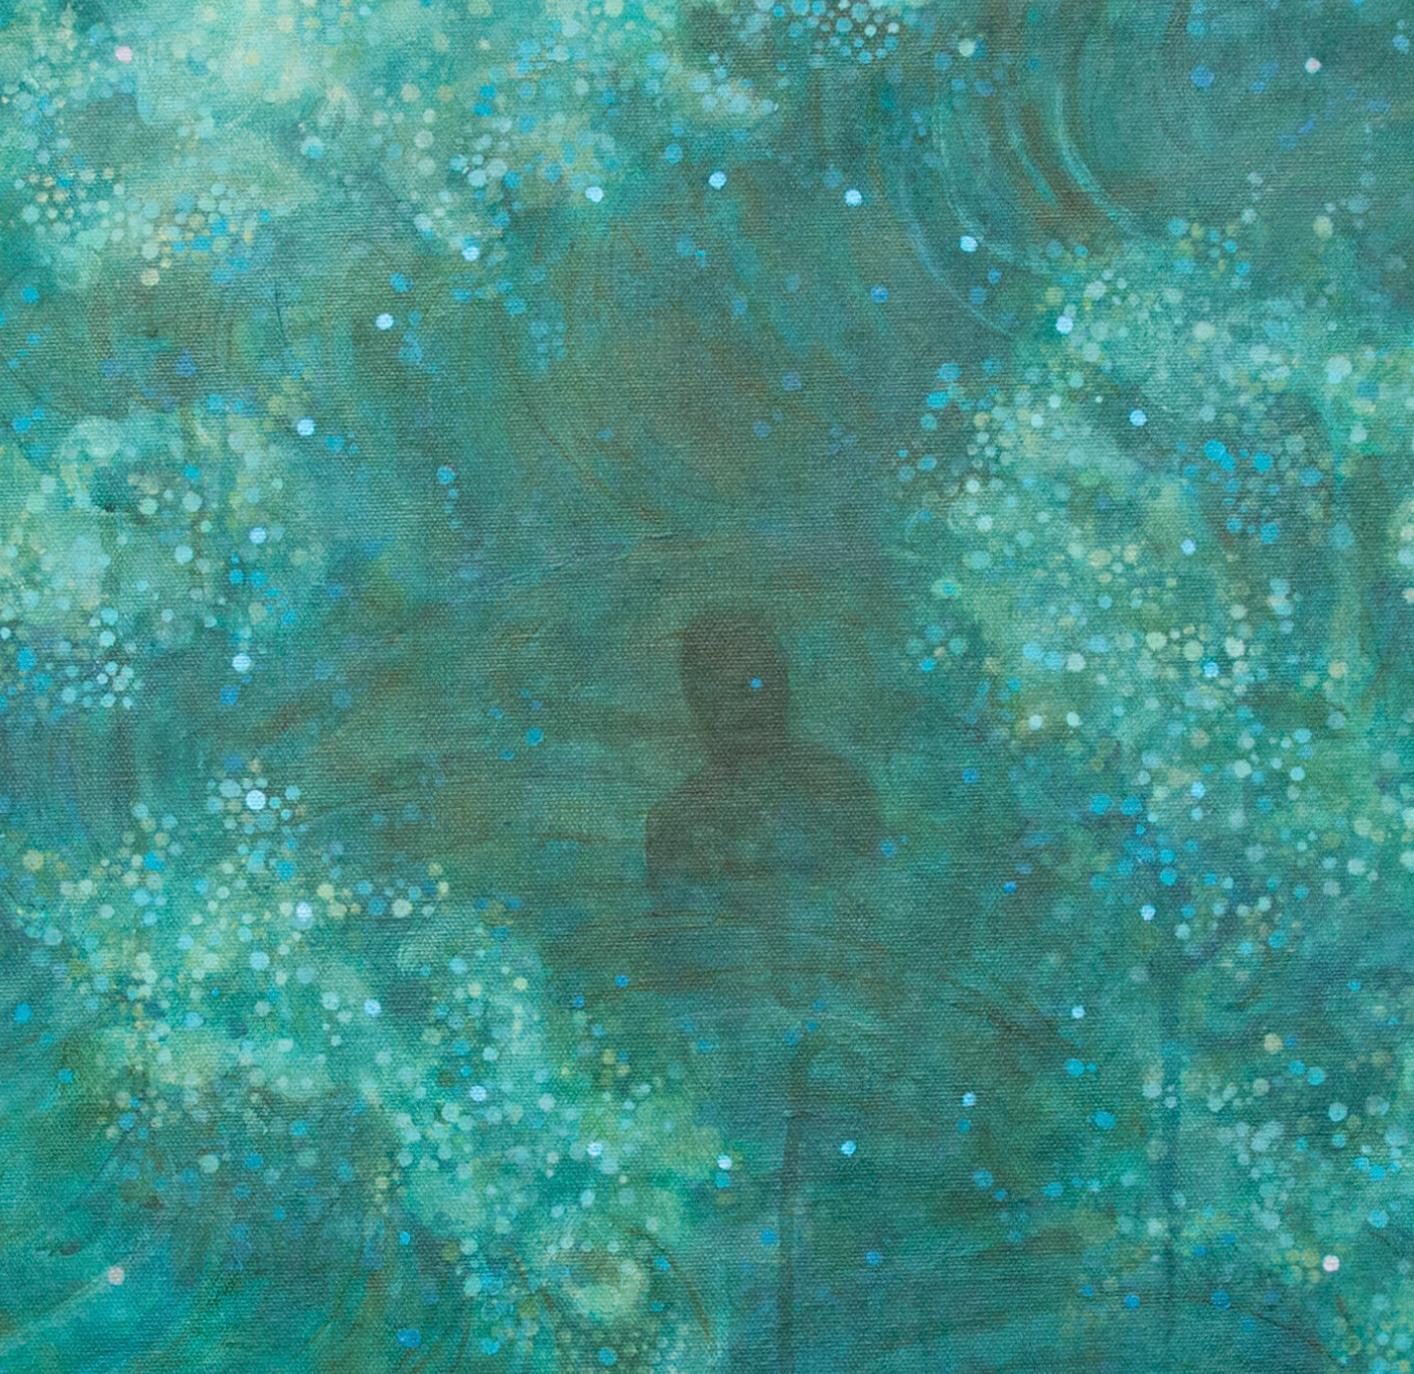 painting of ophelia in the water